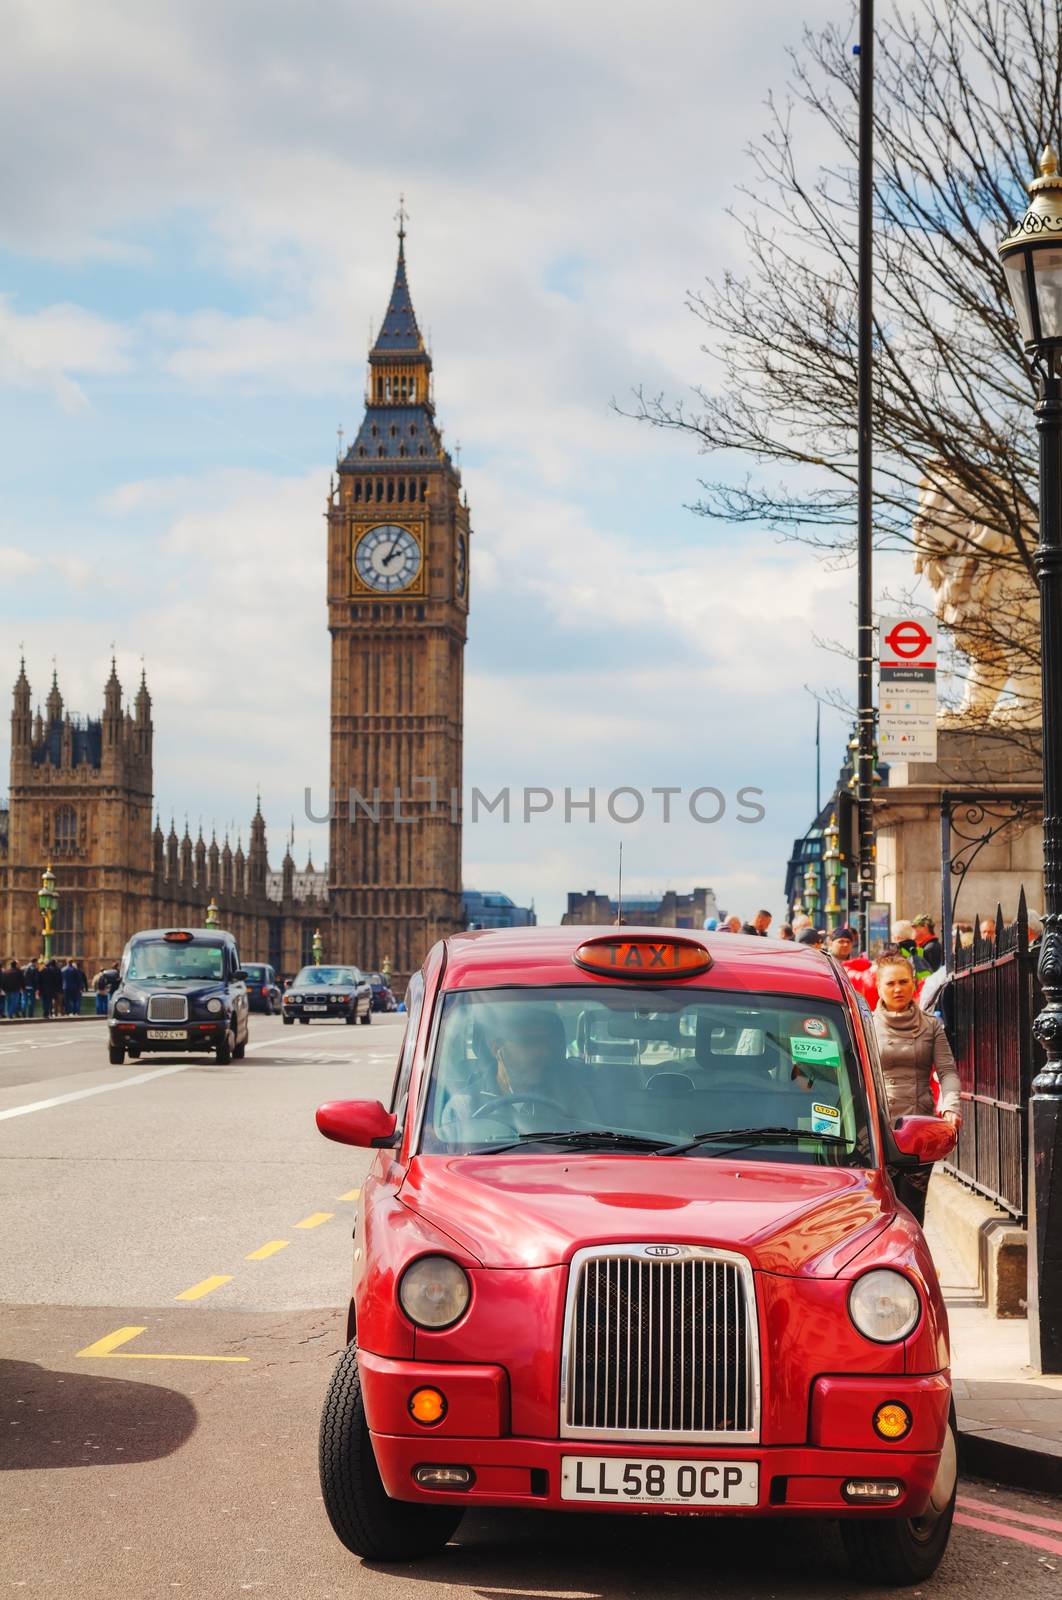 LONDON - APRIL 5: Famous taxi cab (hackney) on a street on April 5, 2015 in London, UK. A hackney or hackney carriage (a cab, black cab, hack or London taxi) is a carriage or automobile for hire.